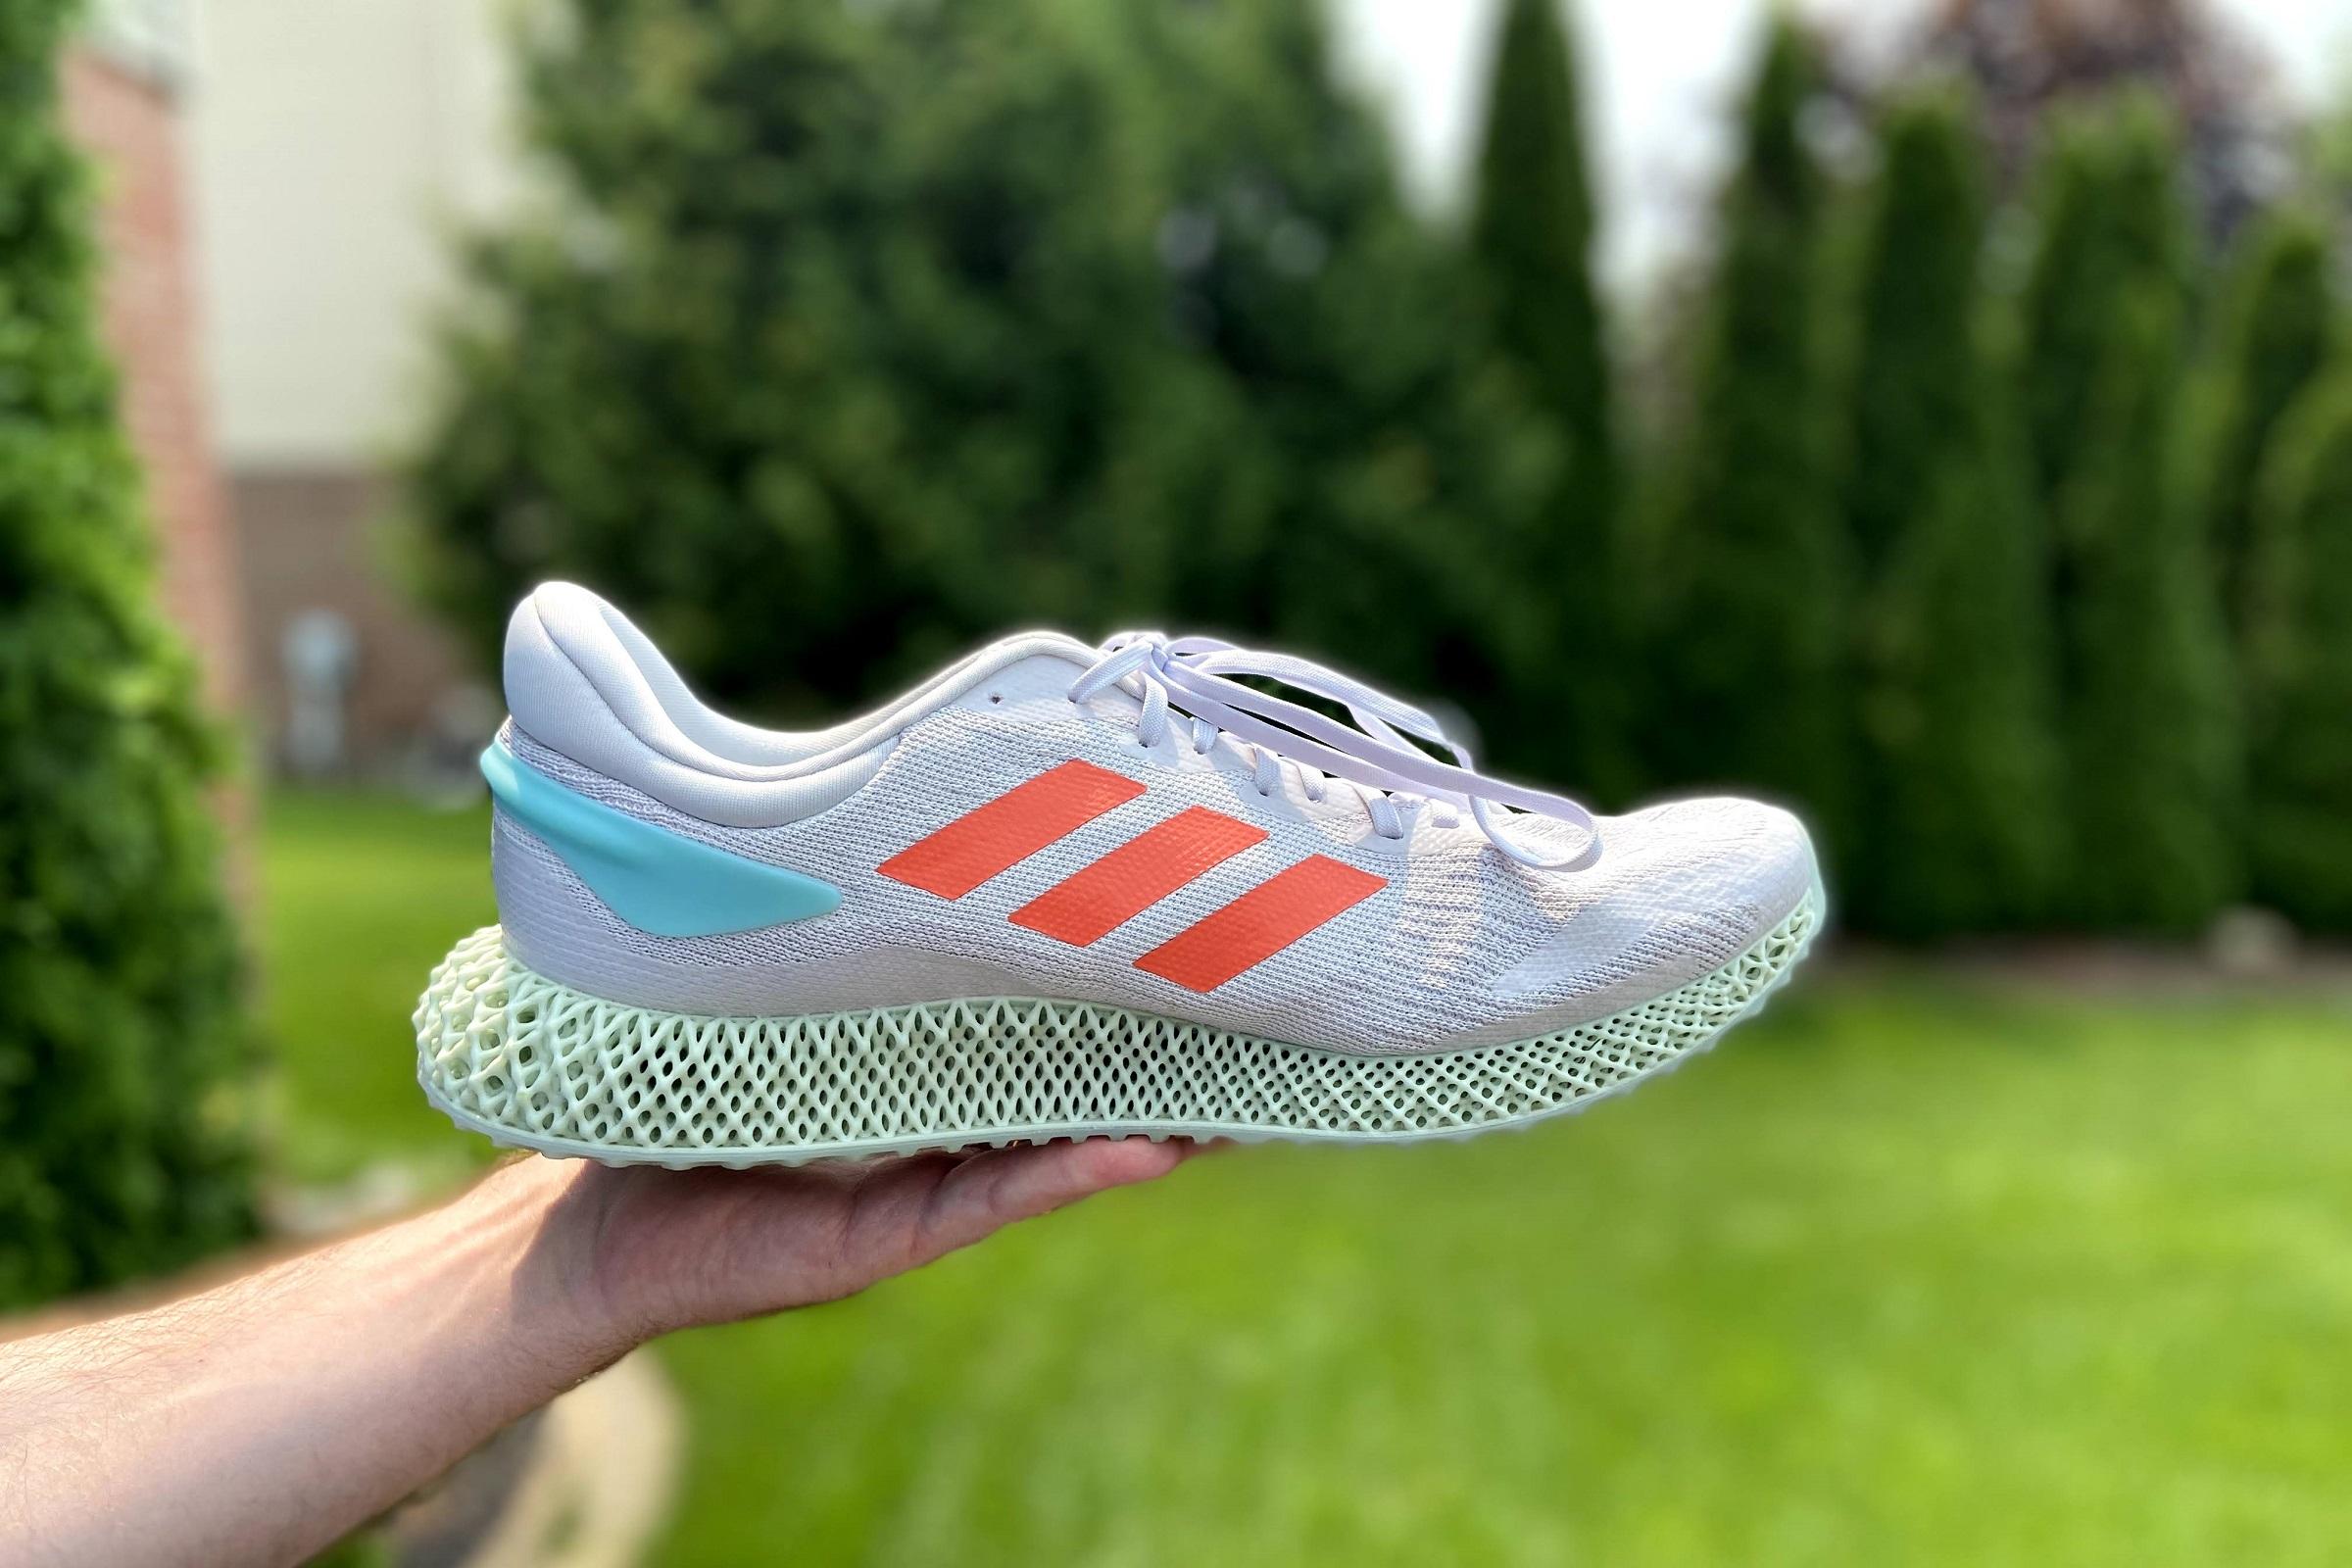 danh-gia-chi-tiet-adidas-4d-run-1-0-review